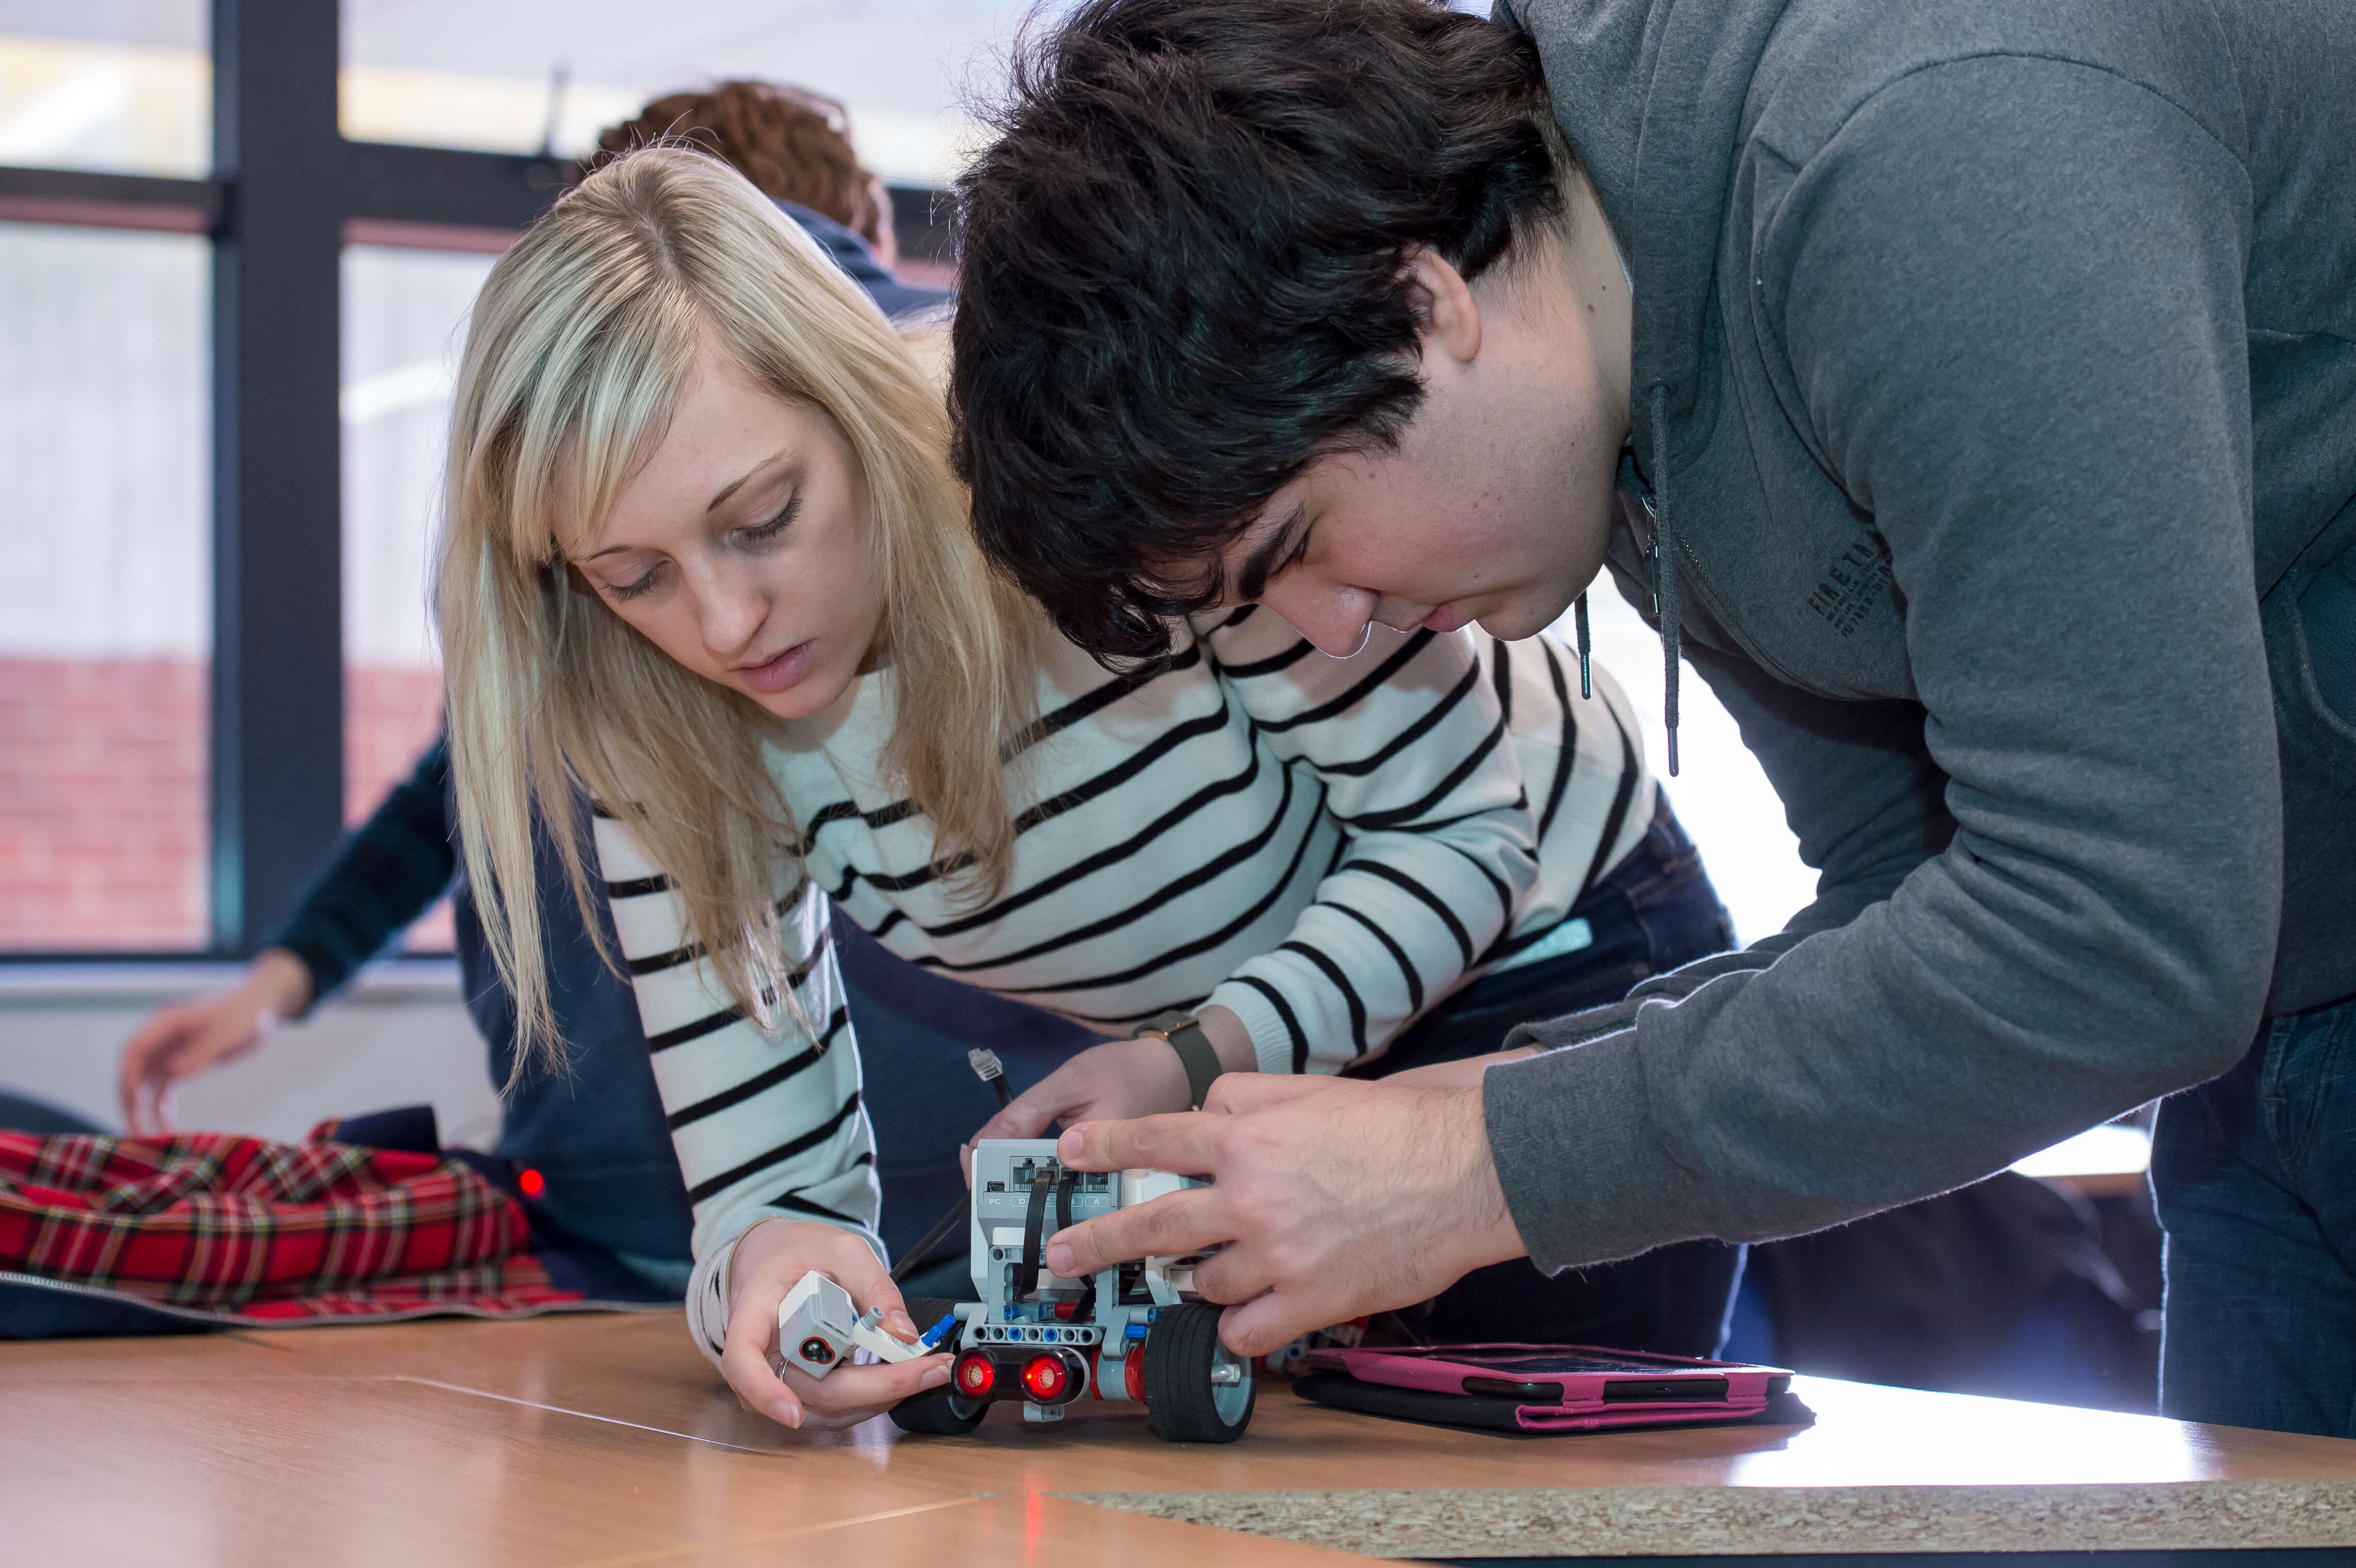 University of Sussex: The key to your future engineering success